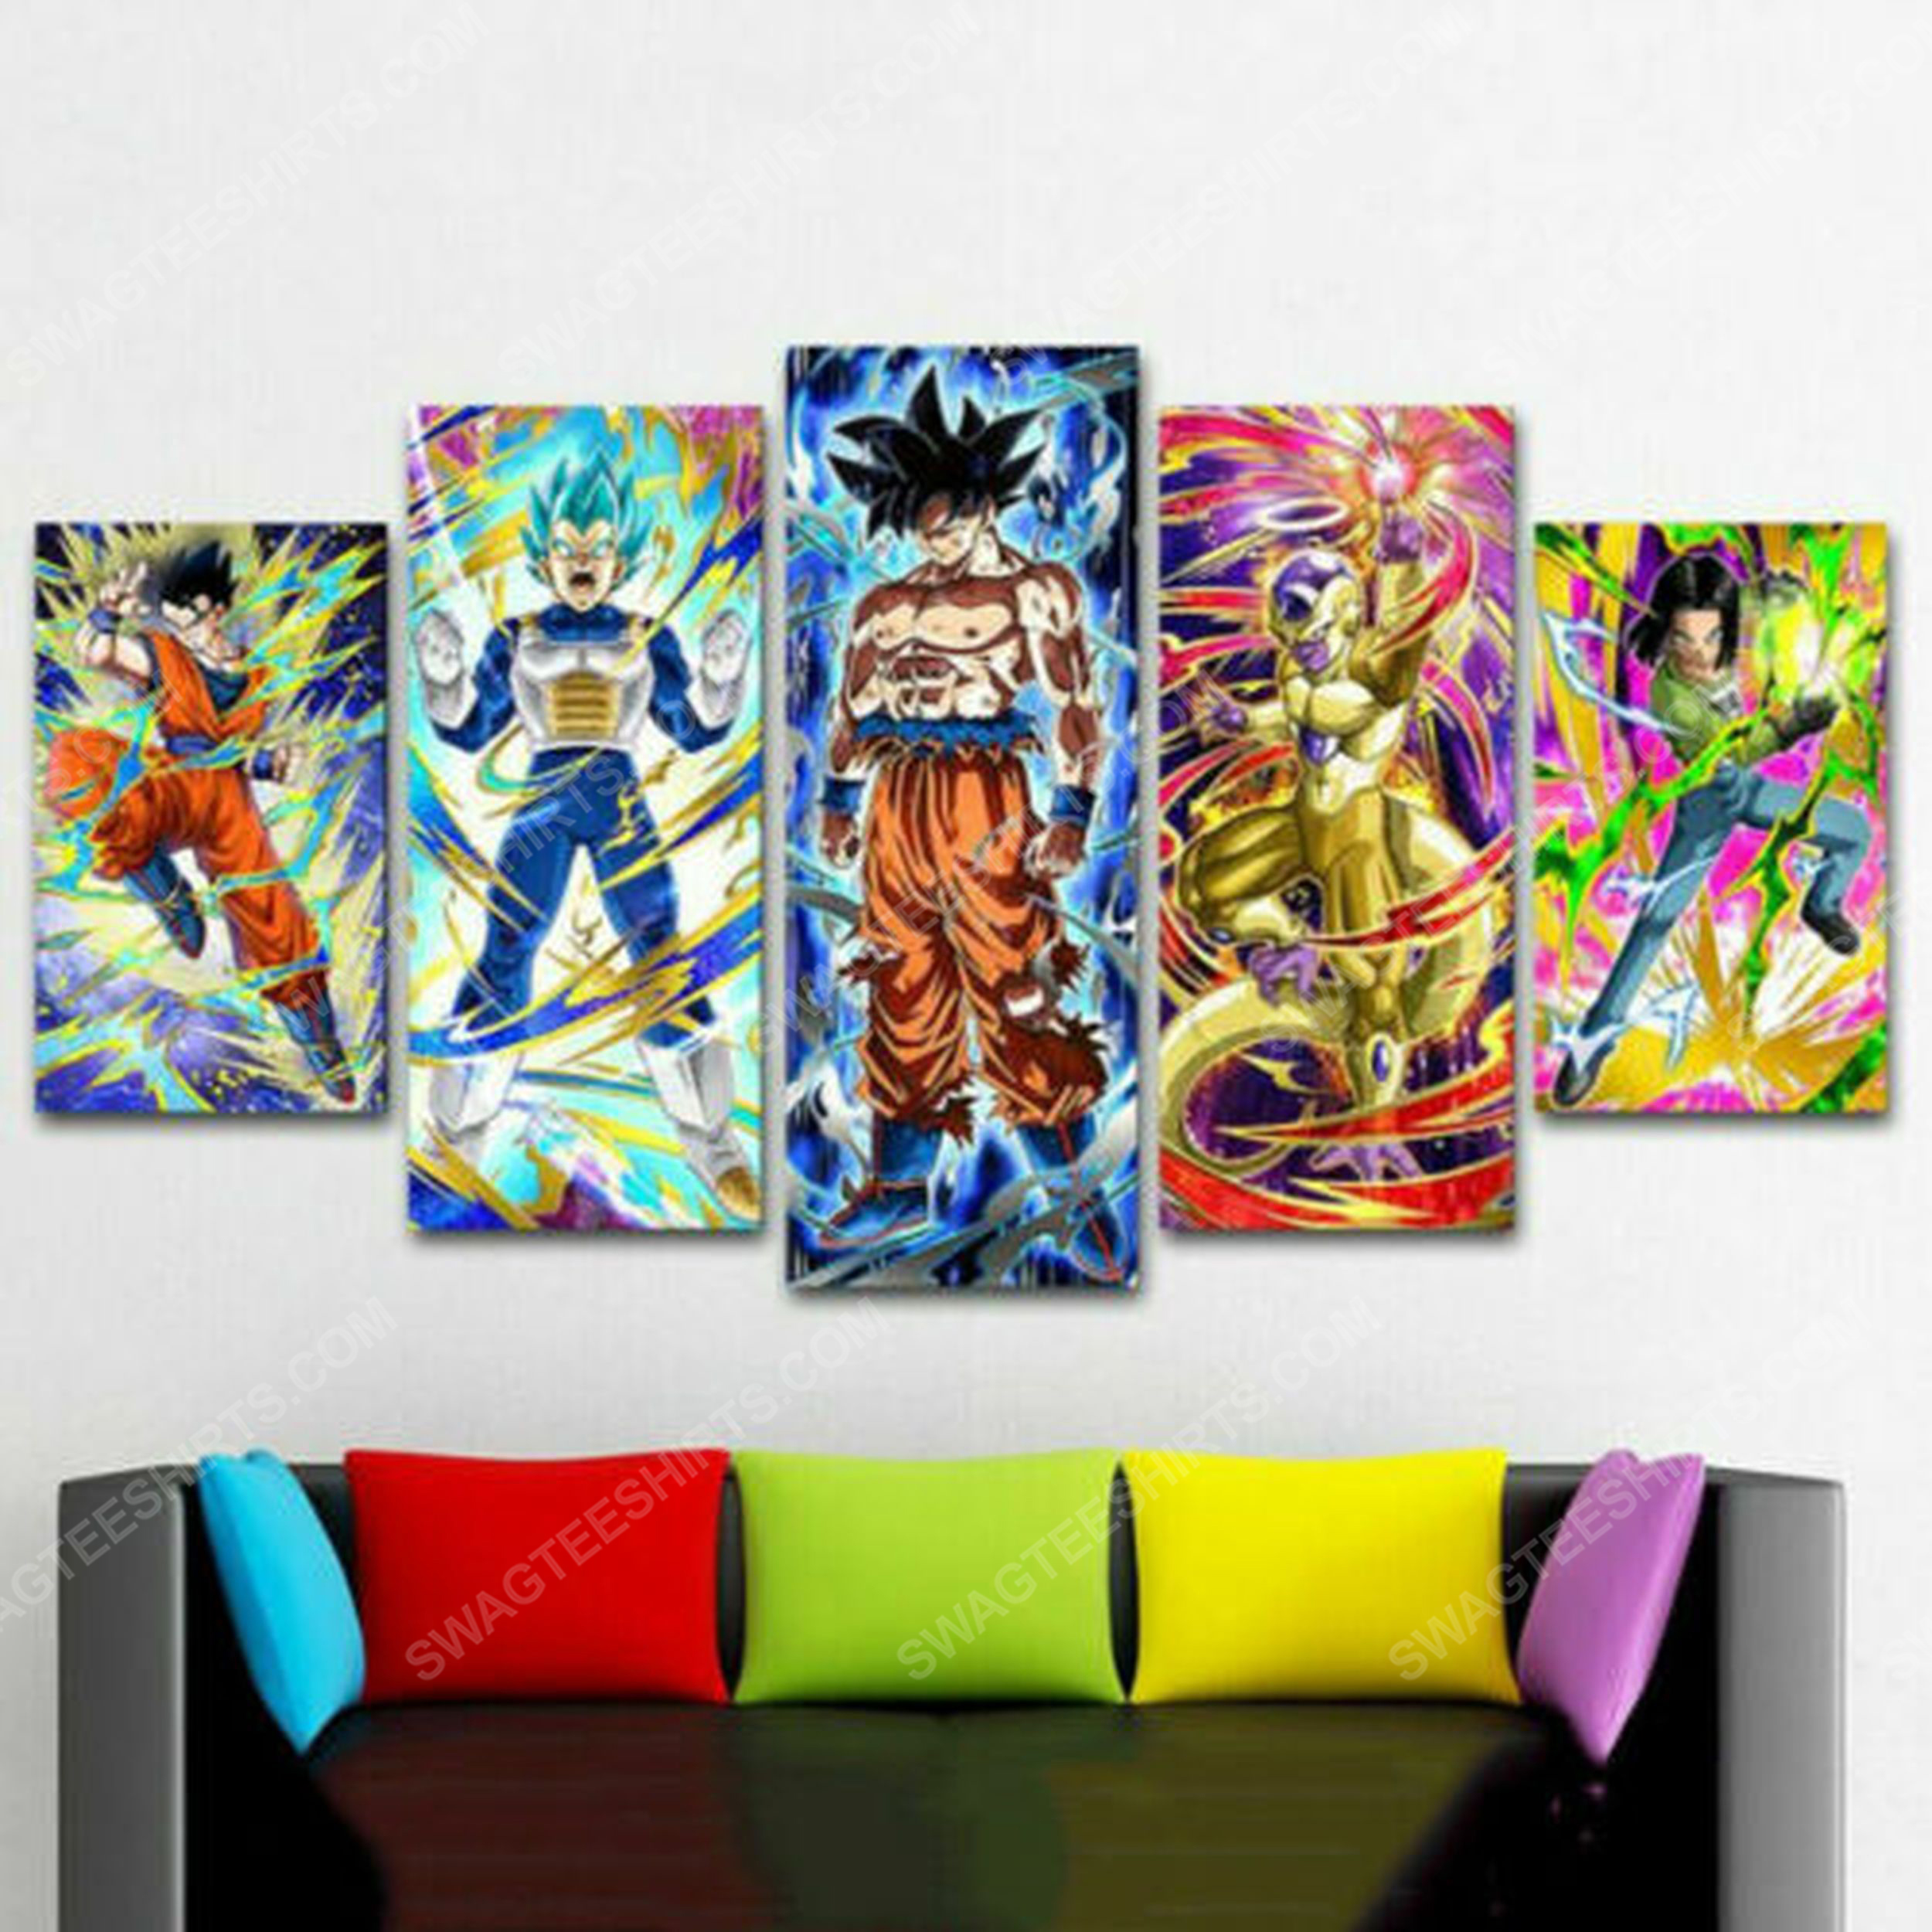 [special edition] Dragon ball z characters anime printed painting canvas wall art home decor – maria